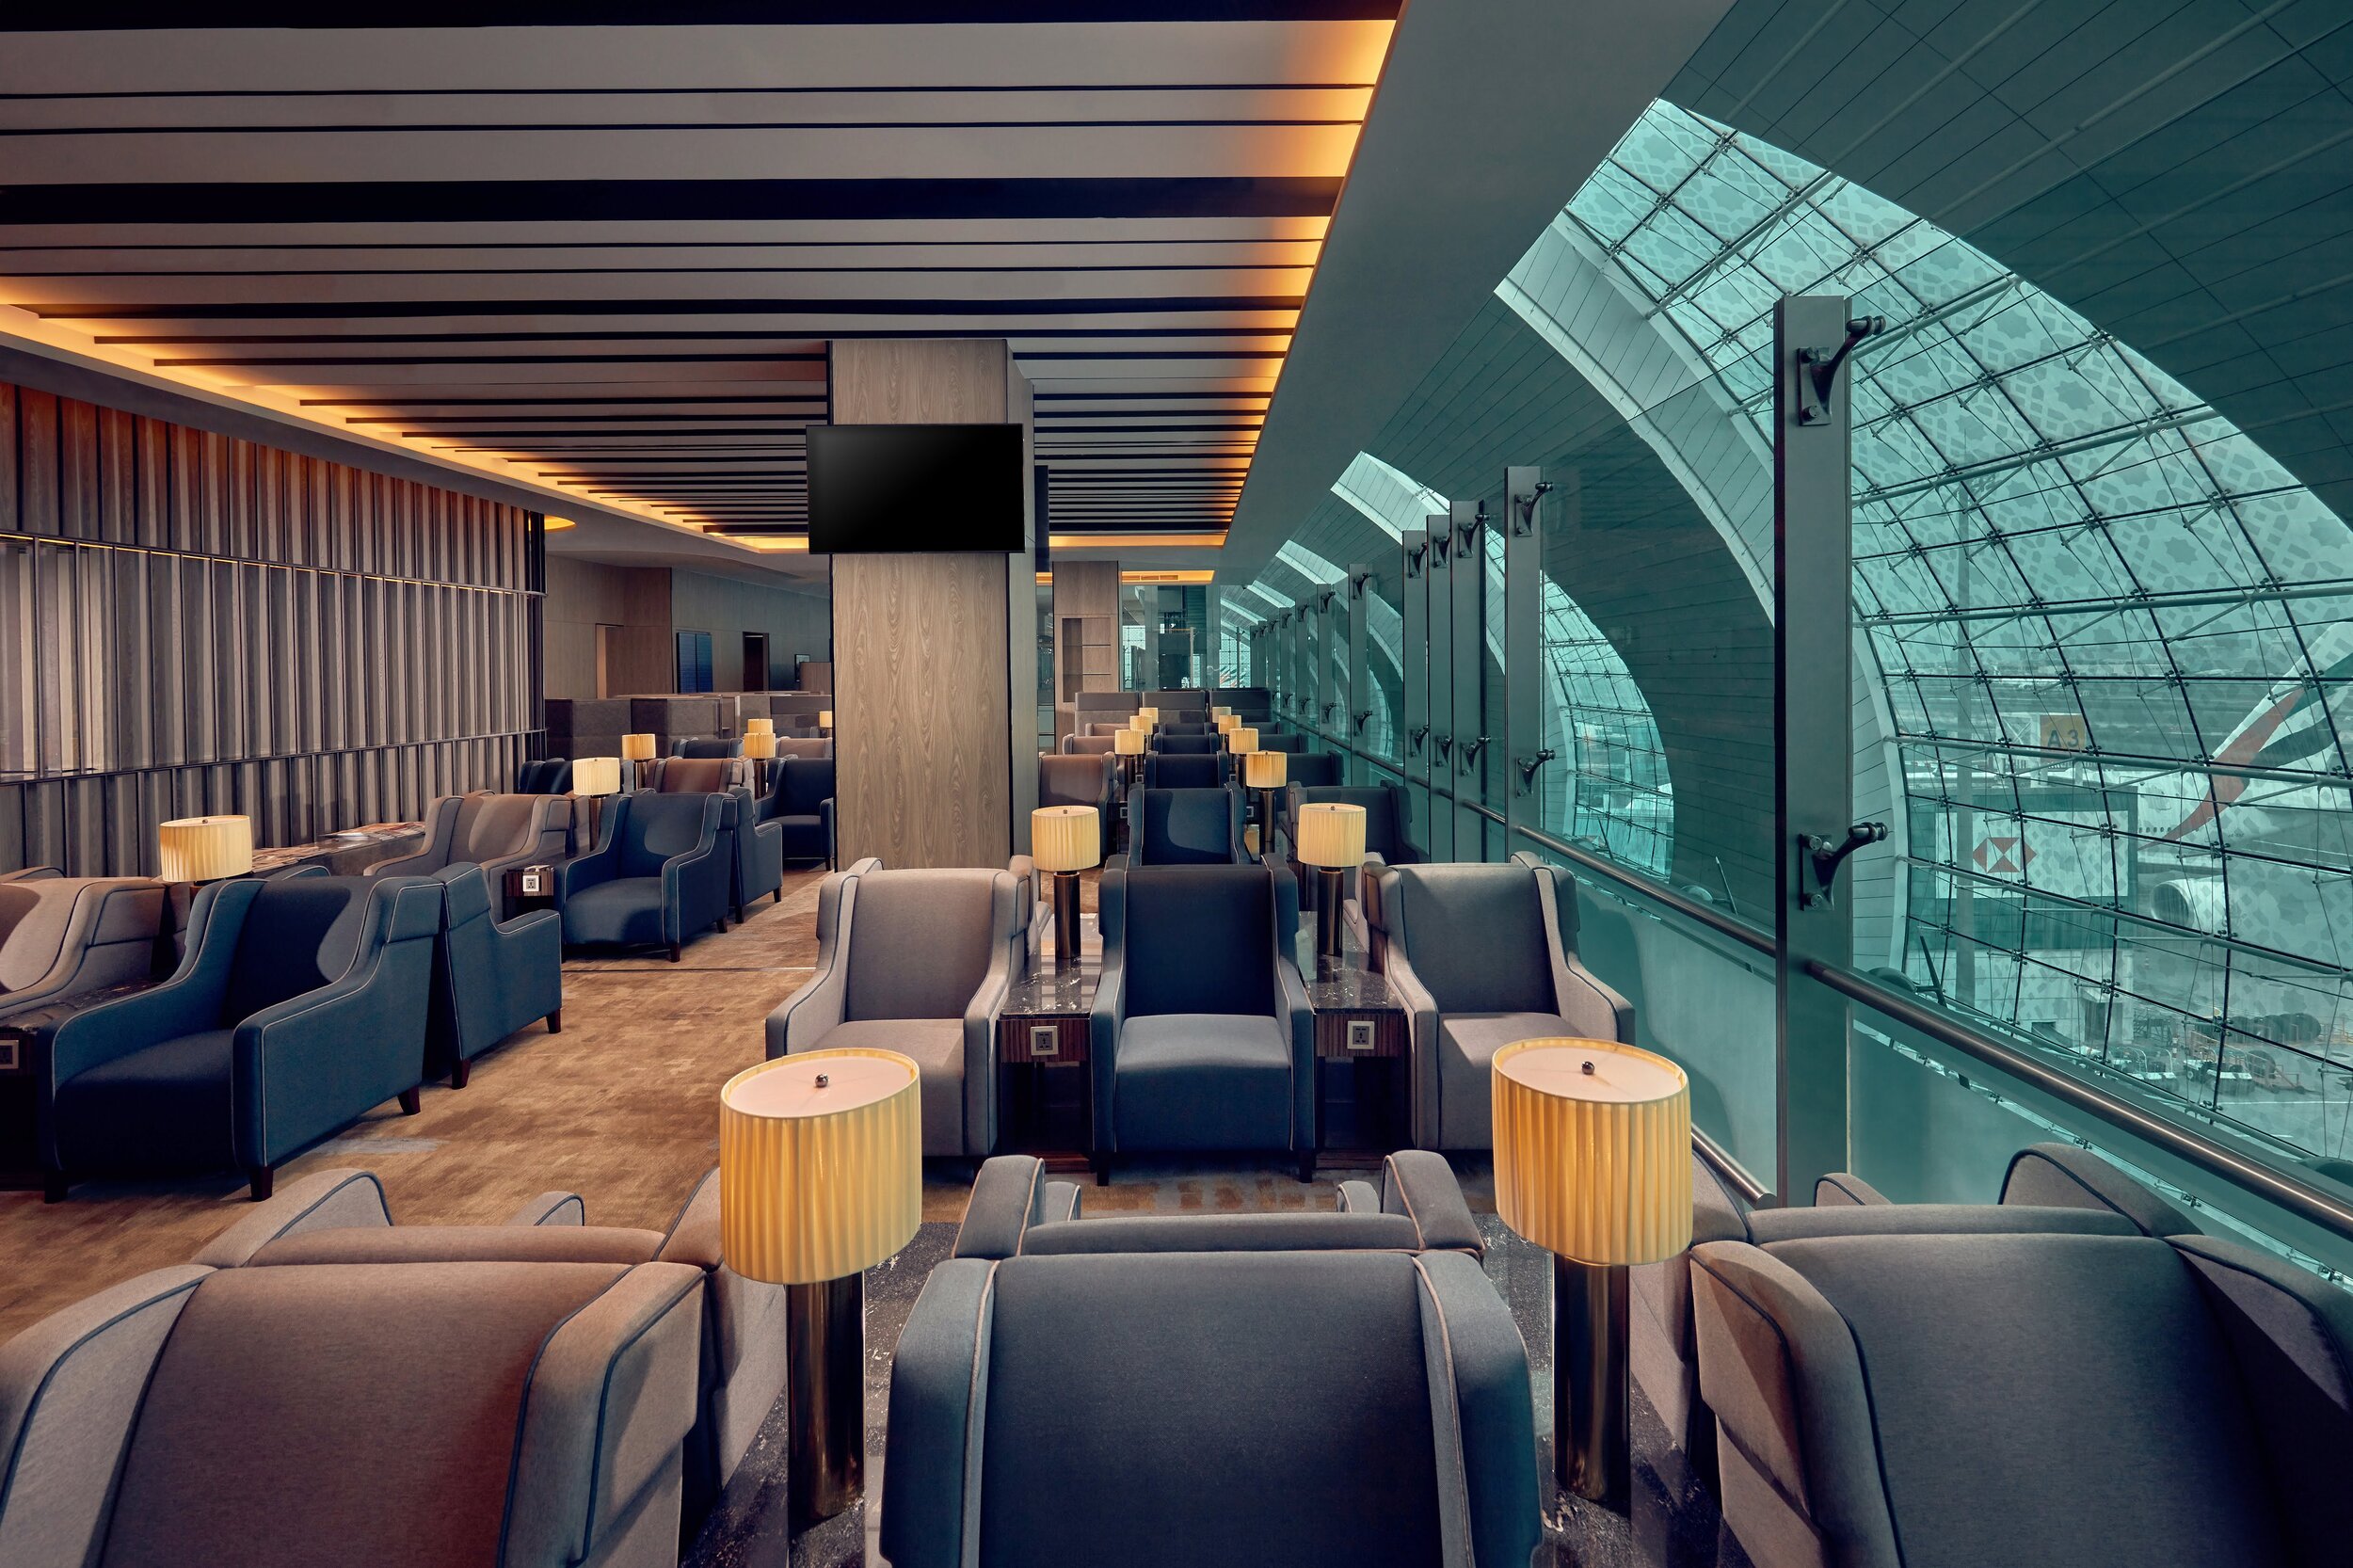 Plaza Premium Lounge Dubai offering global travellers with apron view.jpg